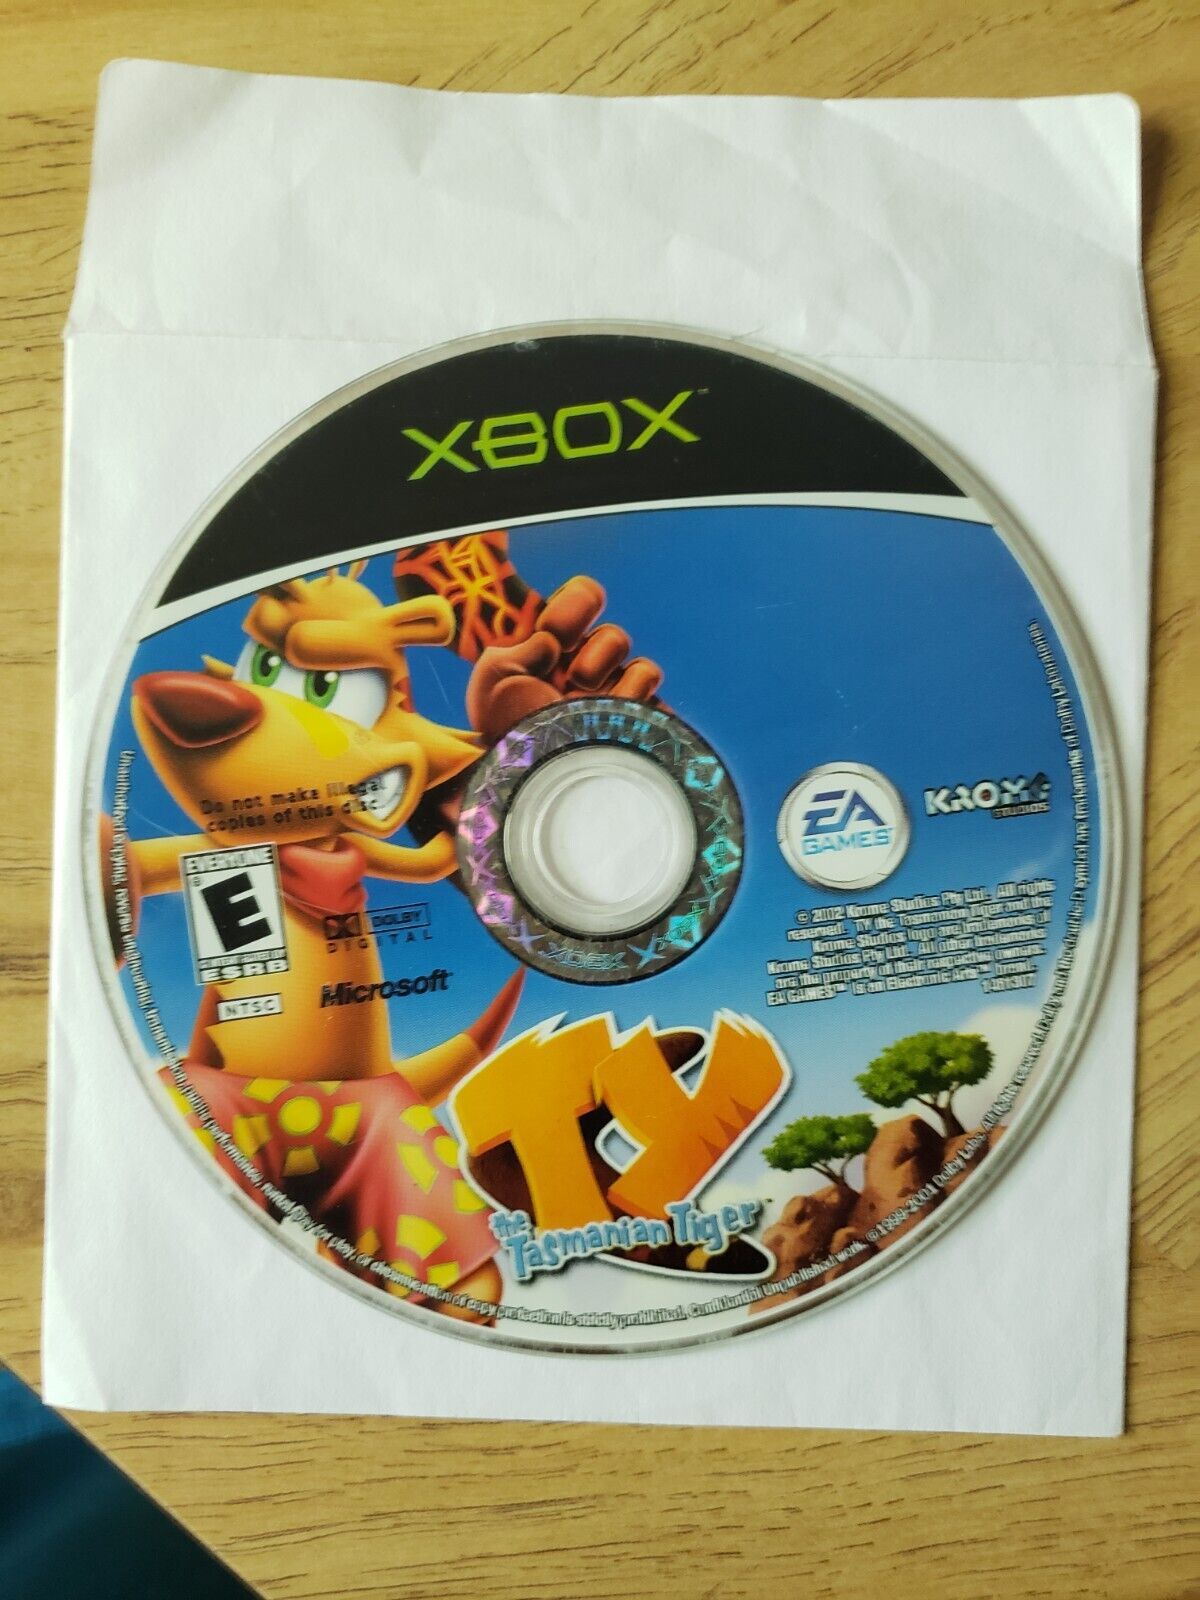 Primary image for Ty the Tasmanian Tiger (Microsoft Xbox, 2002). Free Shipping. Fast Shipping